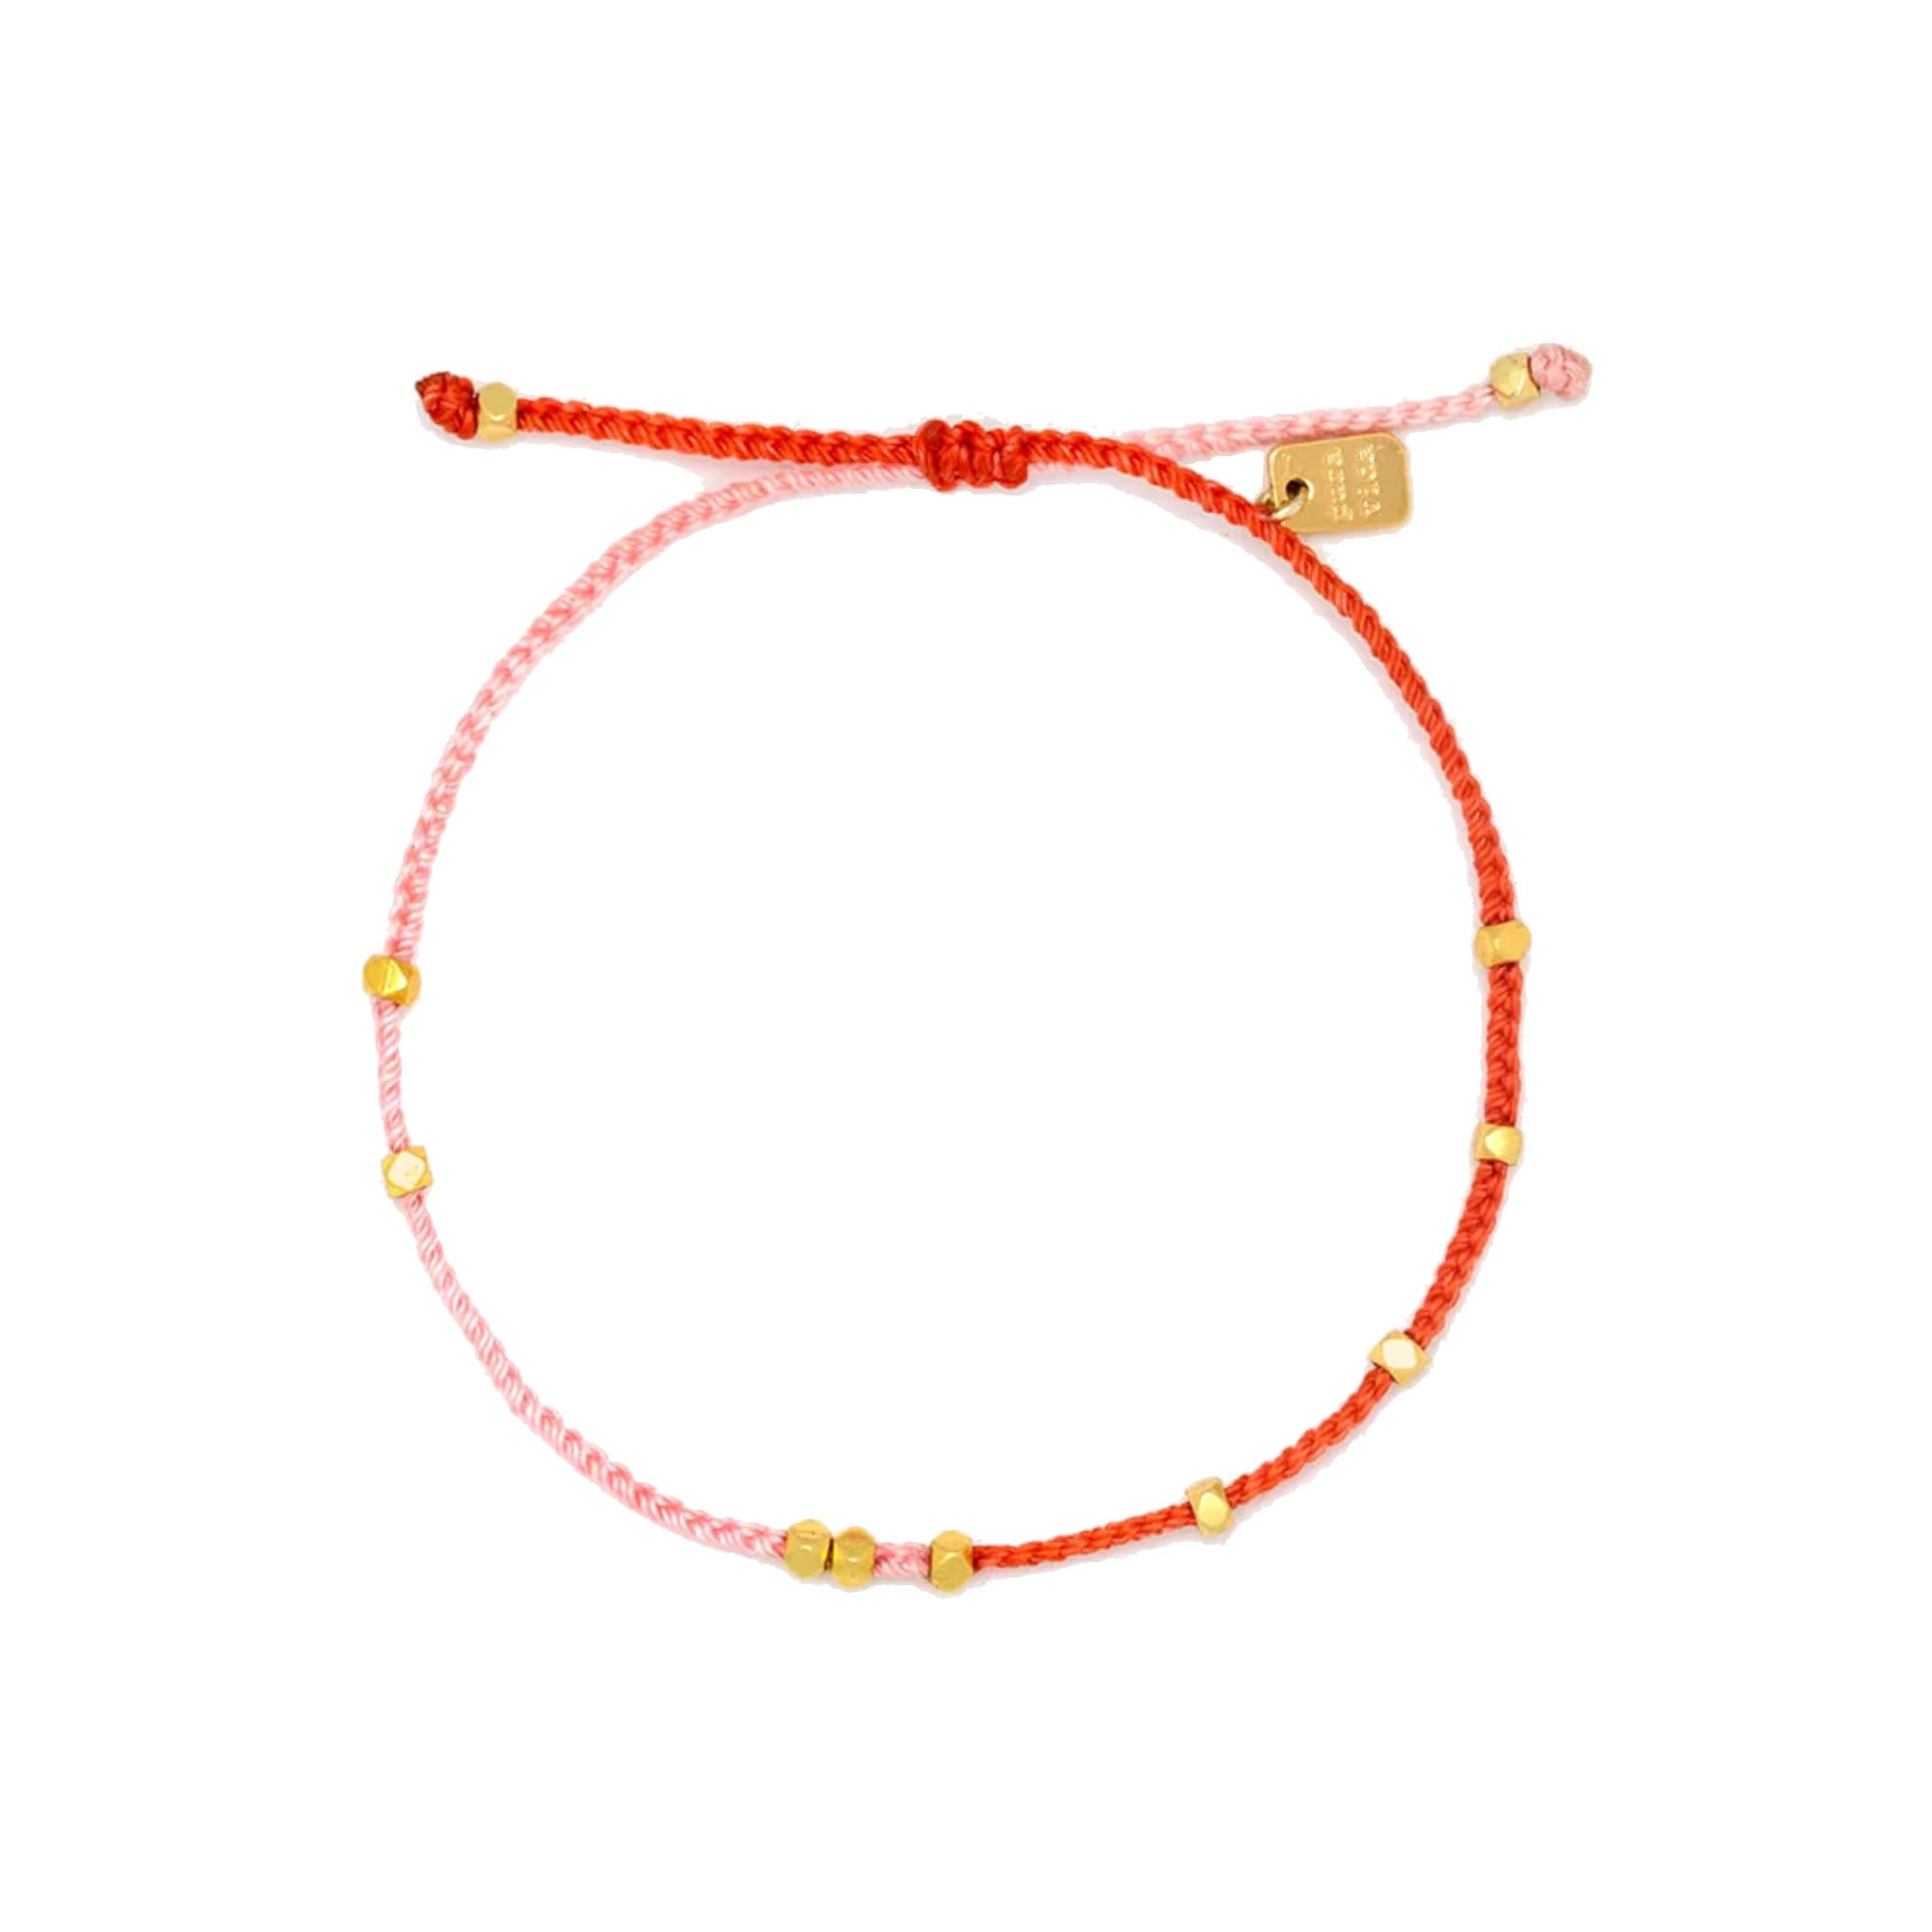 Pura Vida Pink and Red Two-Tone Dainty Bracelet